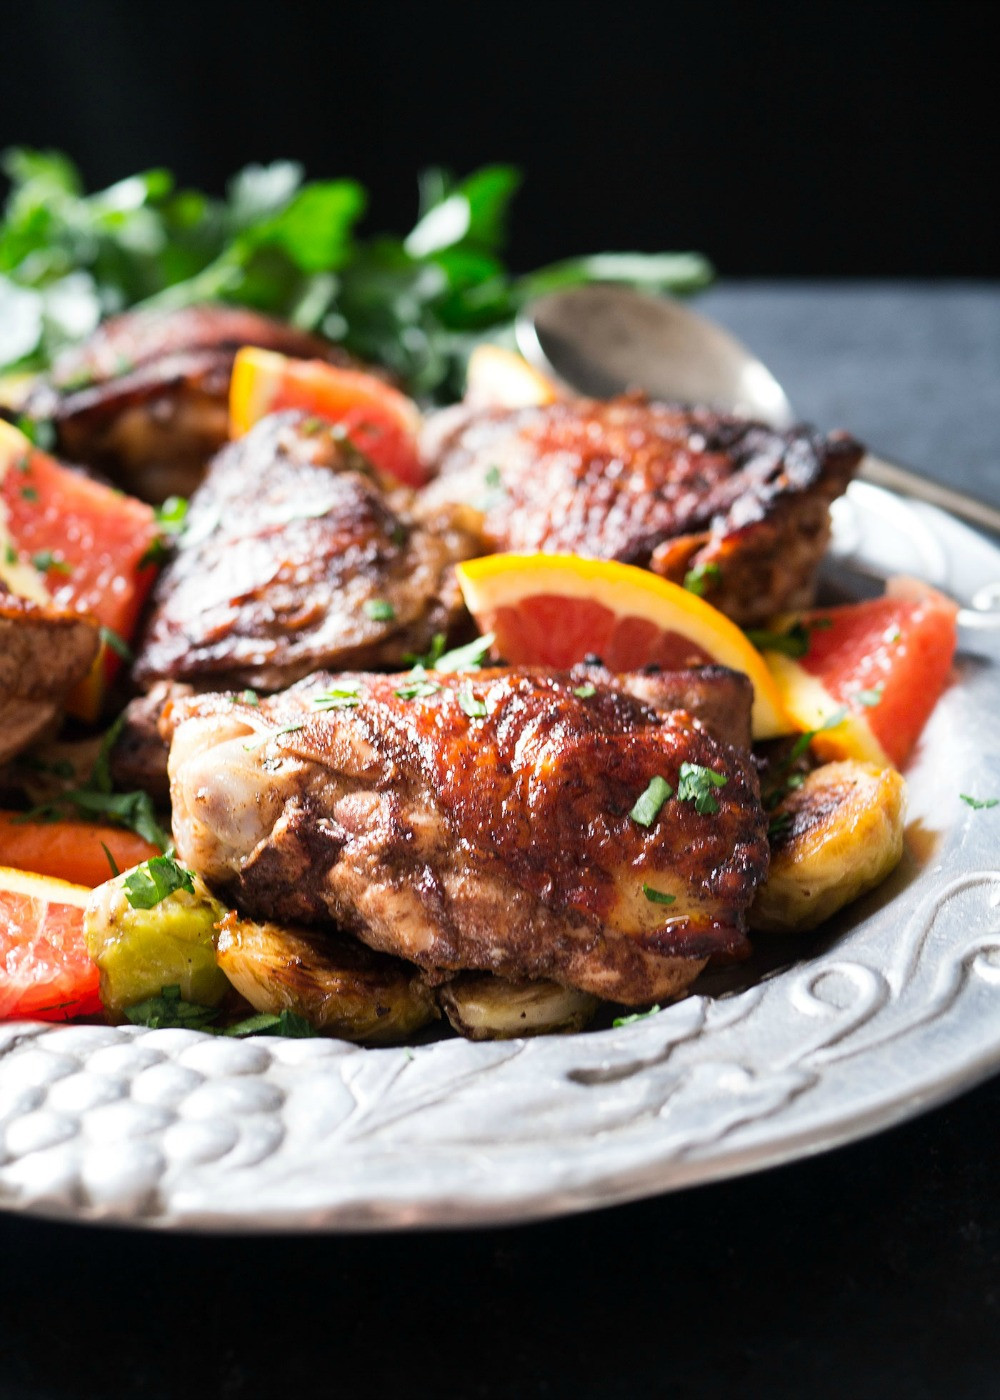 Chicken Thighs Recipe Paleo
 Orange 5 Spice Chicken Thighs with Carrots and Brussels